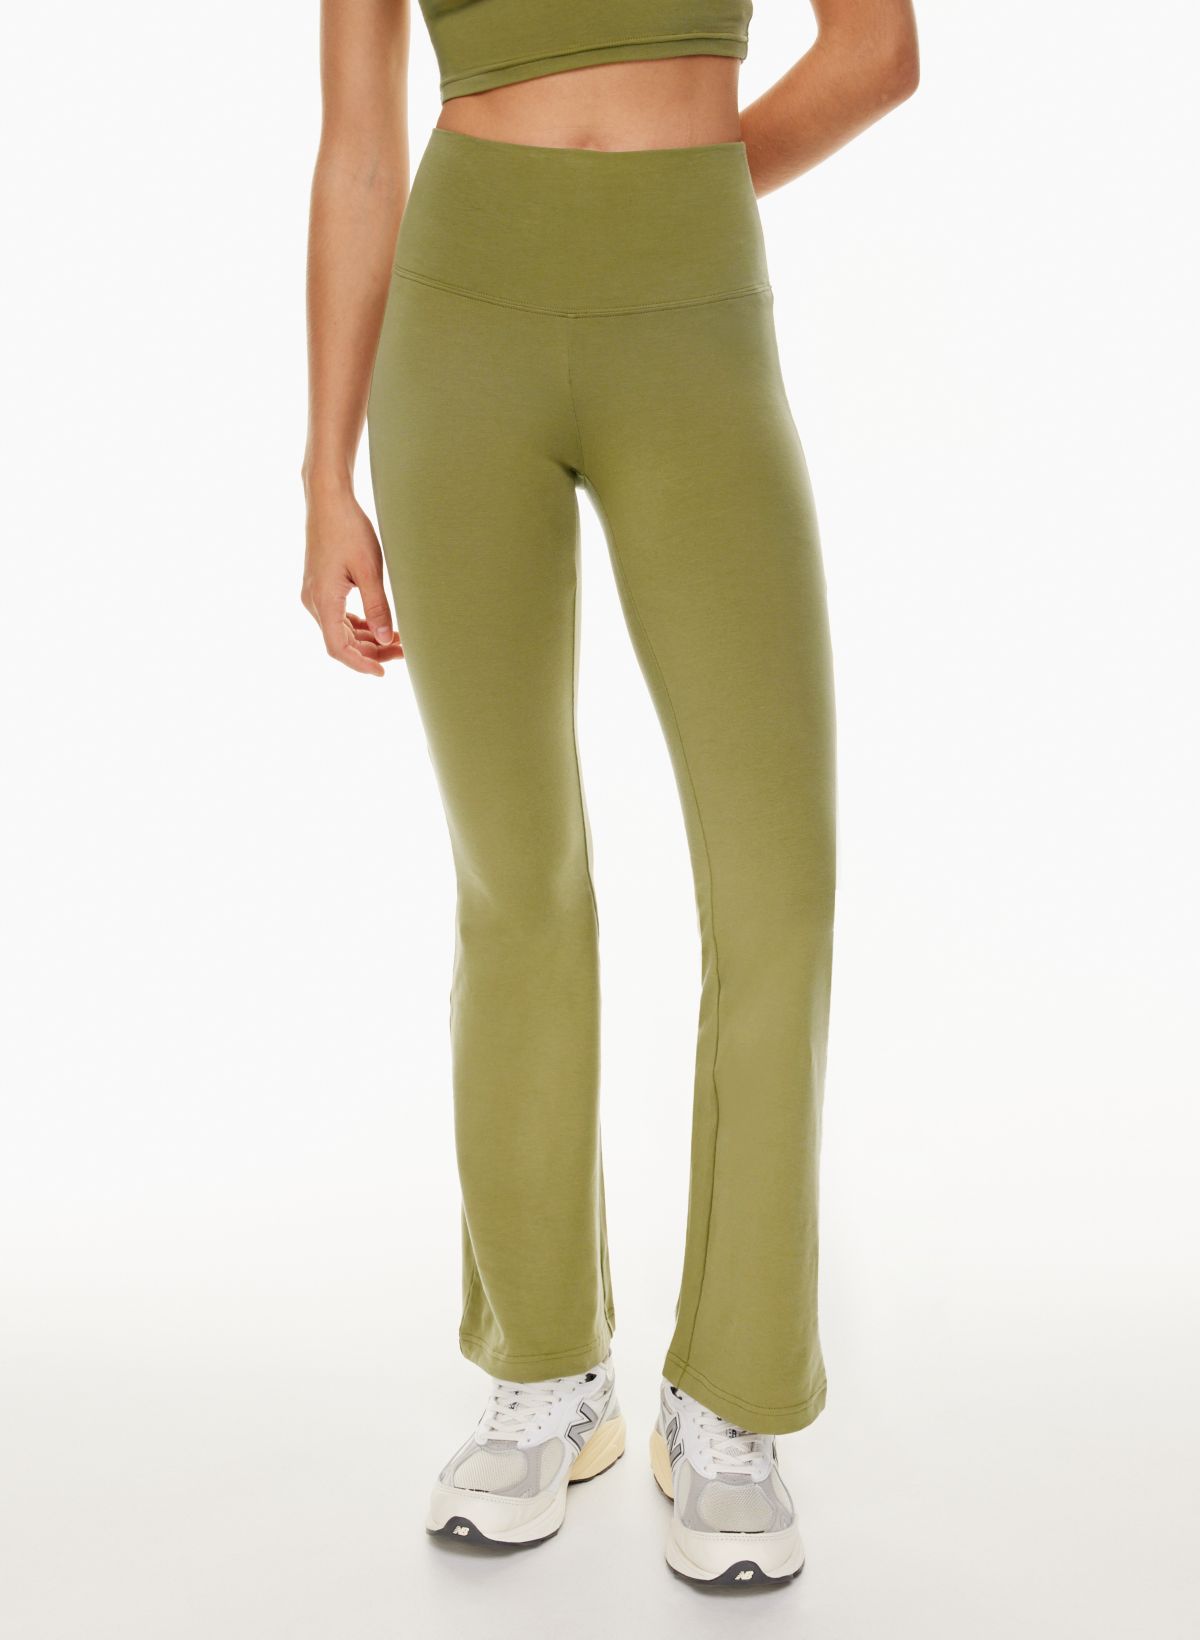 Aritzia TNA Atmosphere Flare Leggings Green Size XXS - $30 New With Tags -  From Delaney